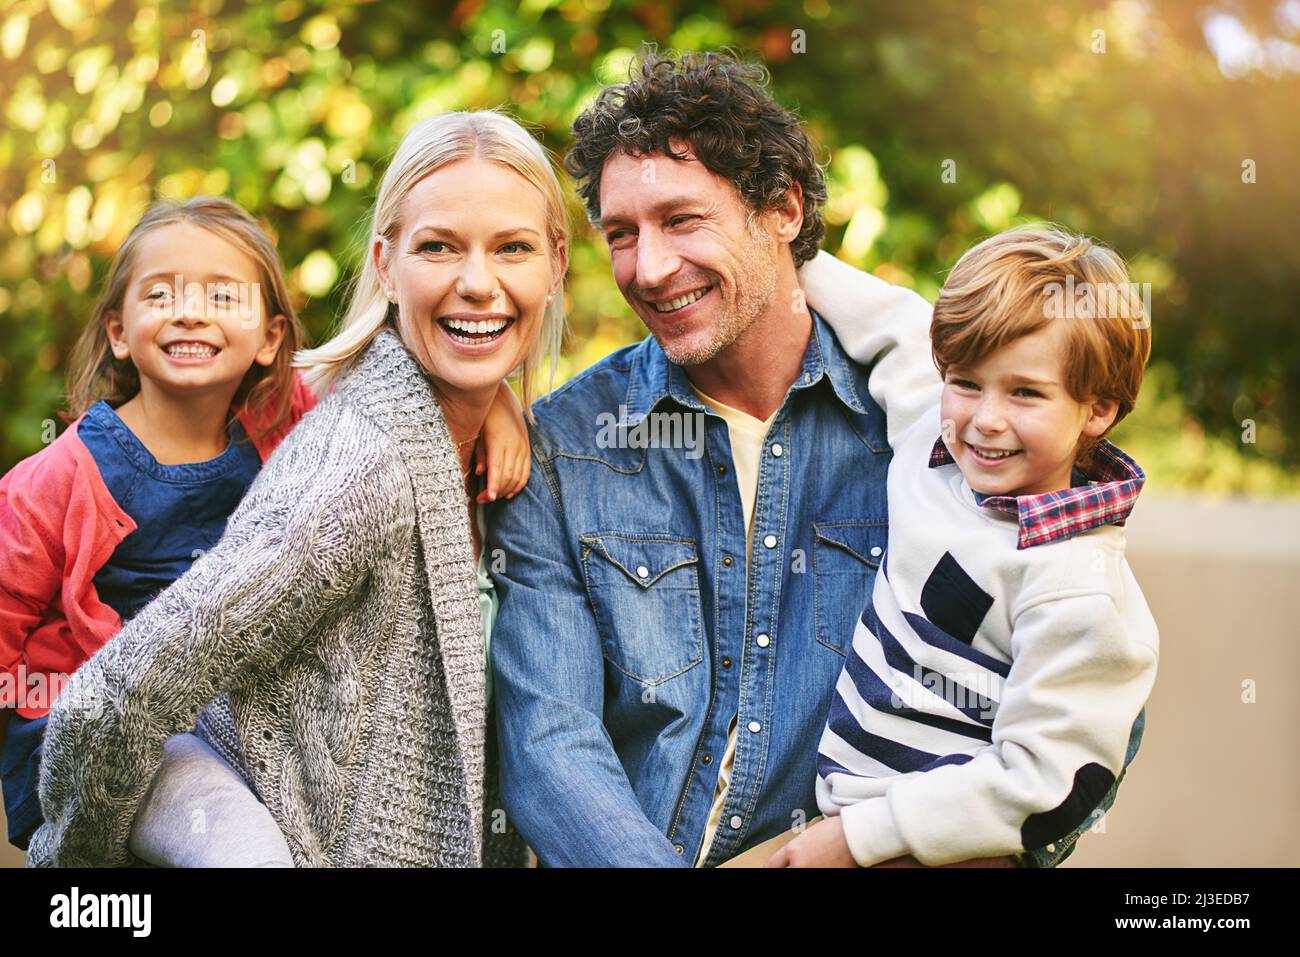 The best moments are those shared with family. Cropped shot of a happy family spending quality time together outside. Stock Photo